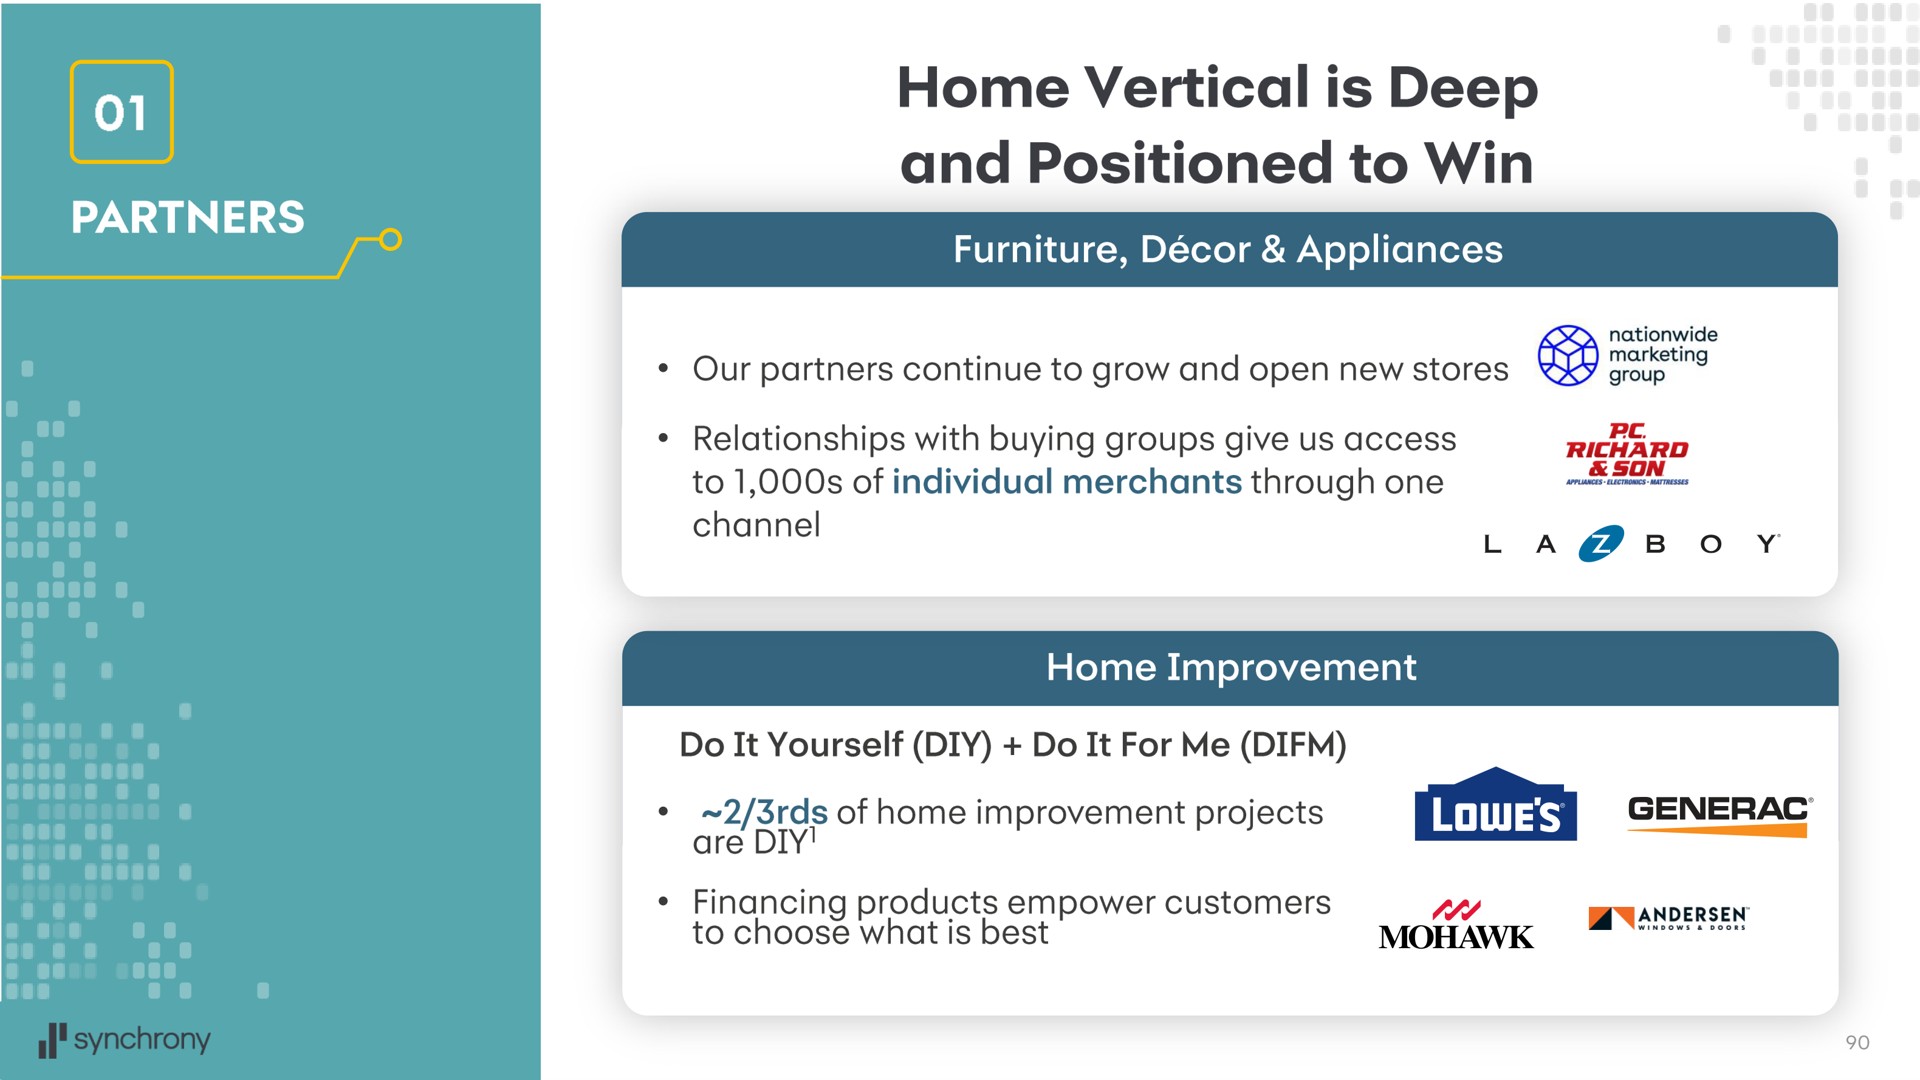 home vertical is deep | Synchrony Financial